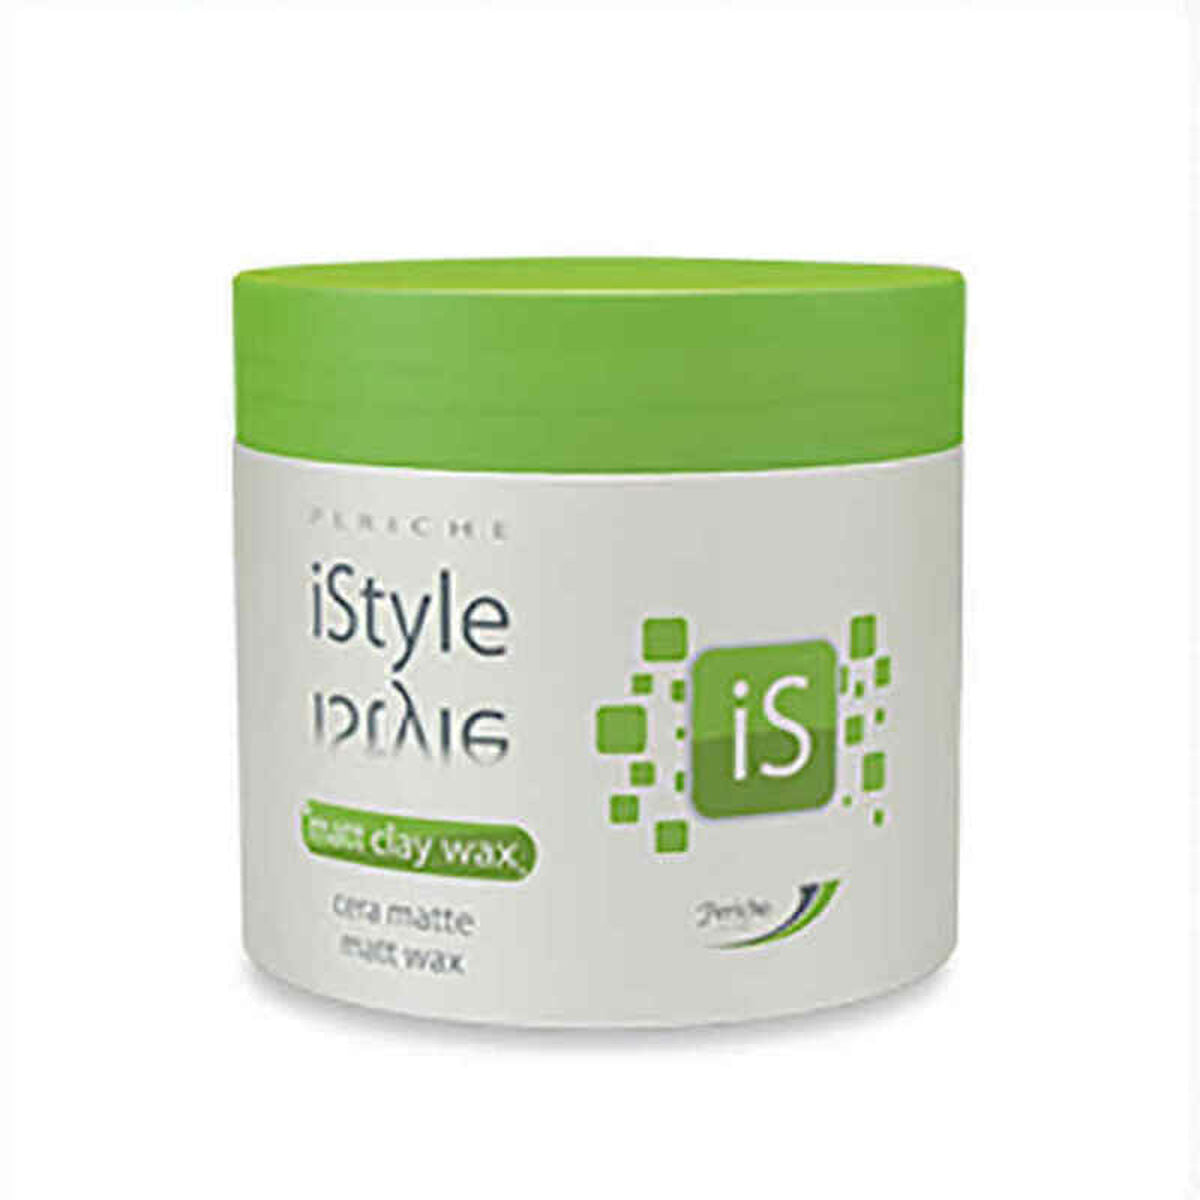 Moulage cire periche istyle isoft mat (100 ml)